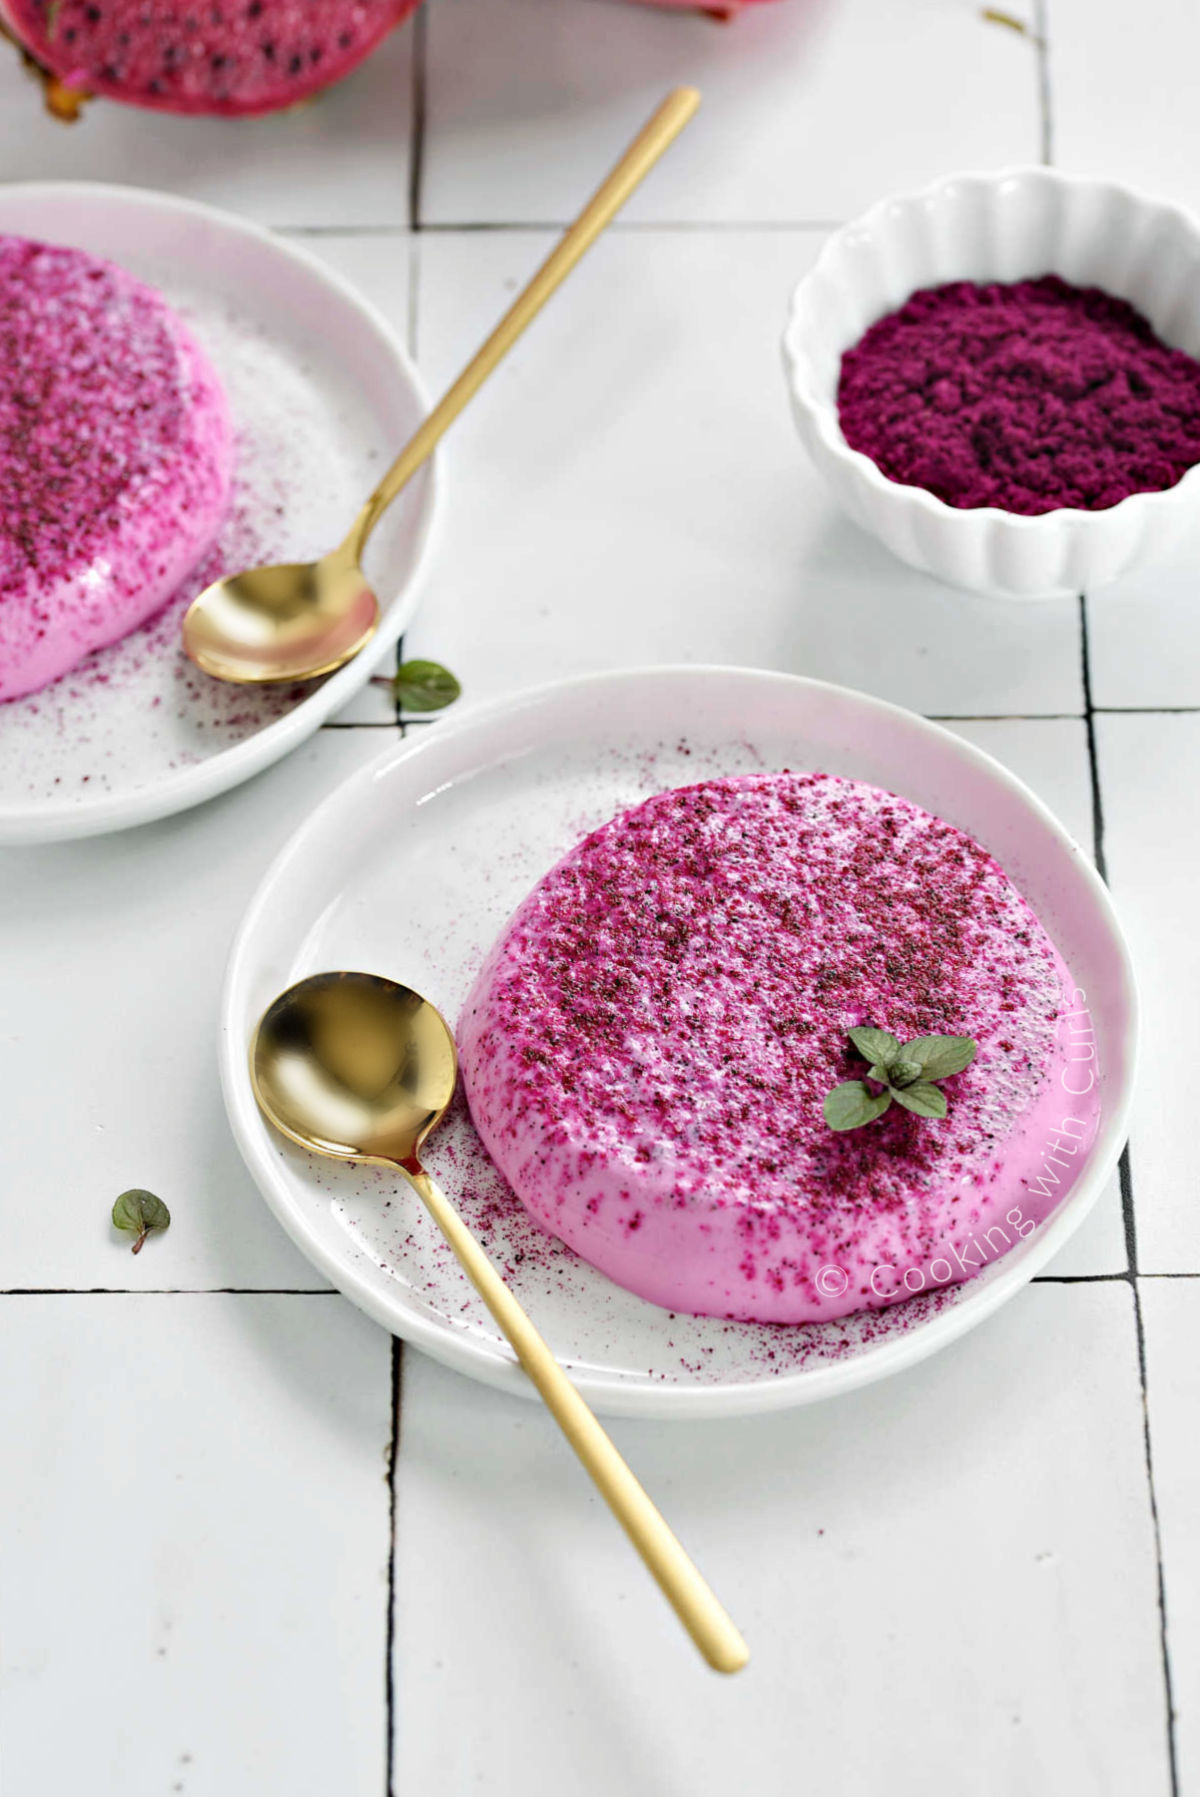 Two small plates with pink panna cotta sprinkled with dragon fruit powder.